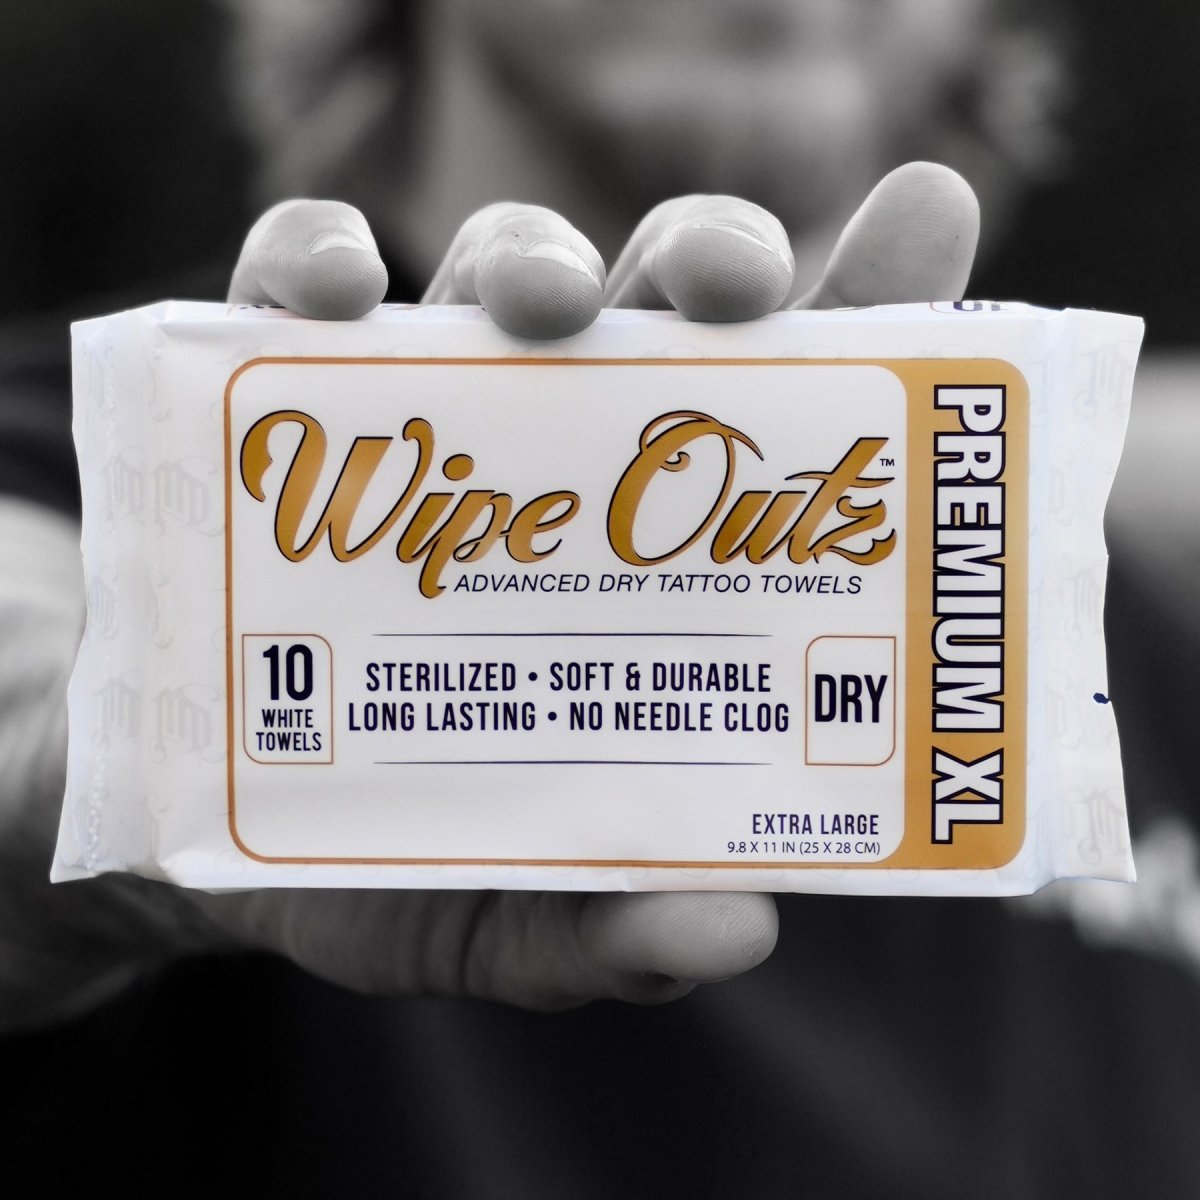 Wipe Outz Premium XL Tattoo Towels (dry white 10ct) PREORDER - MD Wipe Outz